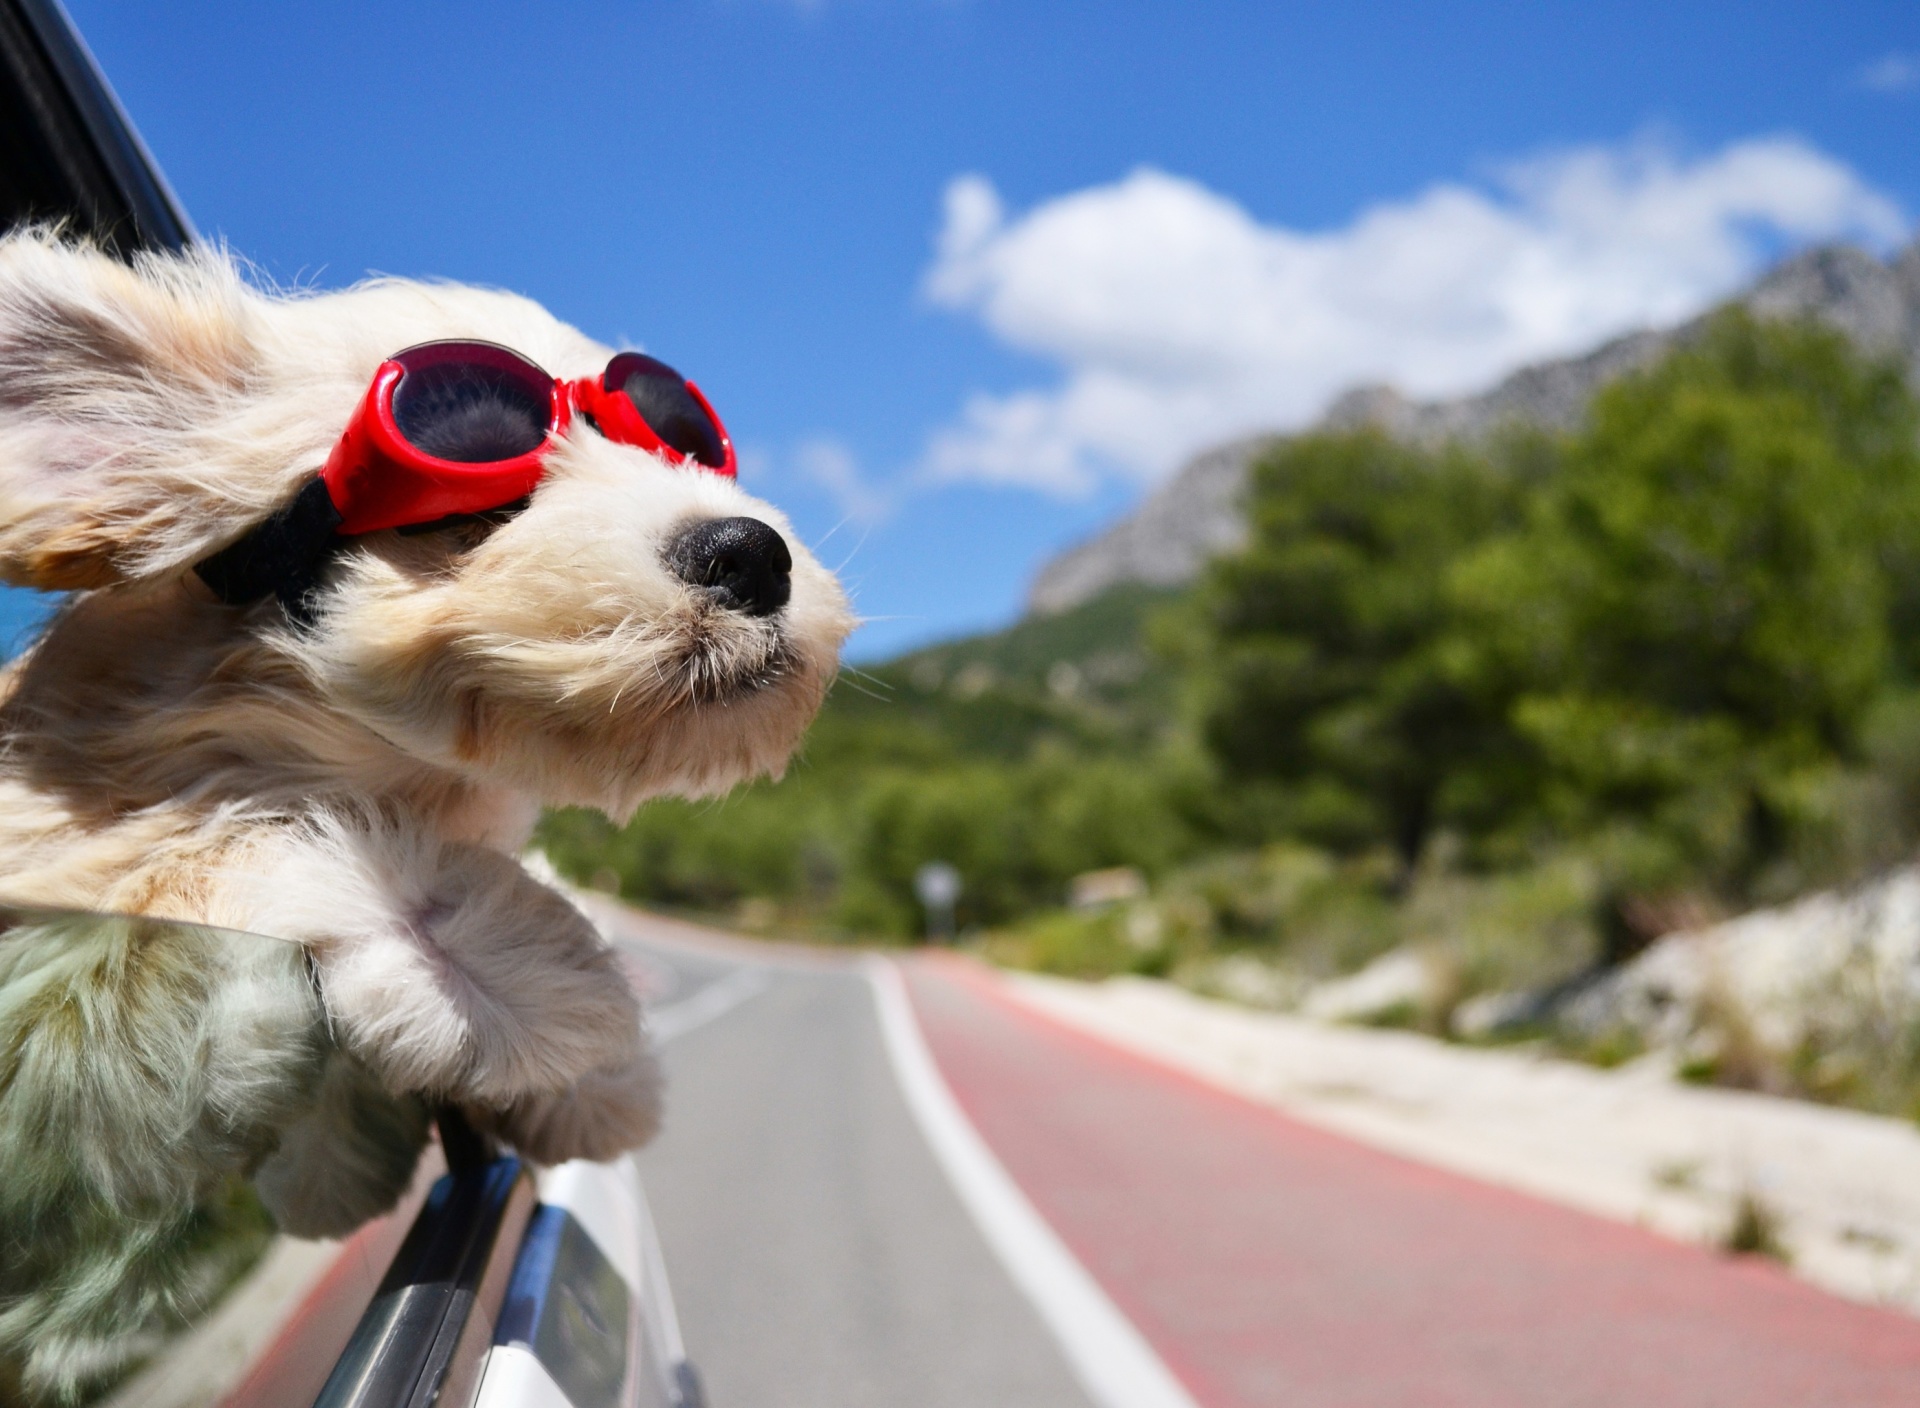 Dog in convertible car on vacation wallpaper 1920x1408